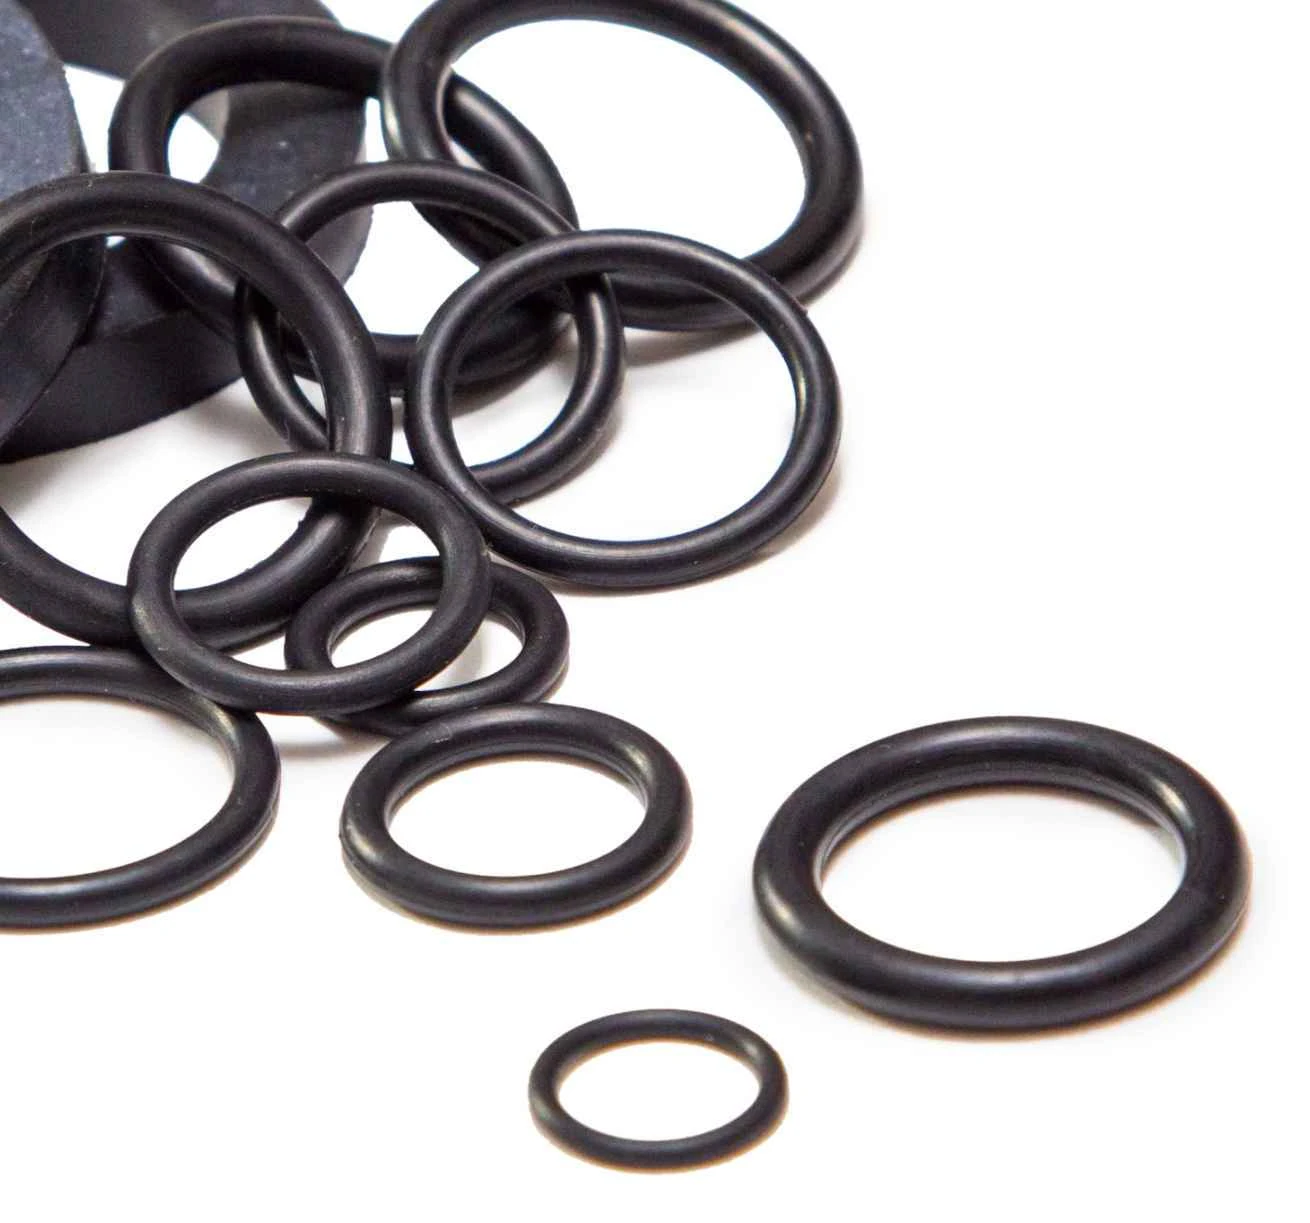 Our O-rings are designed for applications in high-pressure power applications, meeting and often exceeding SAE standards.